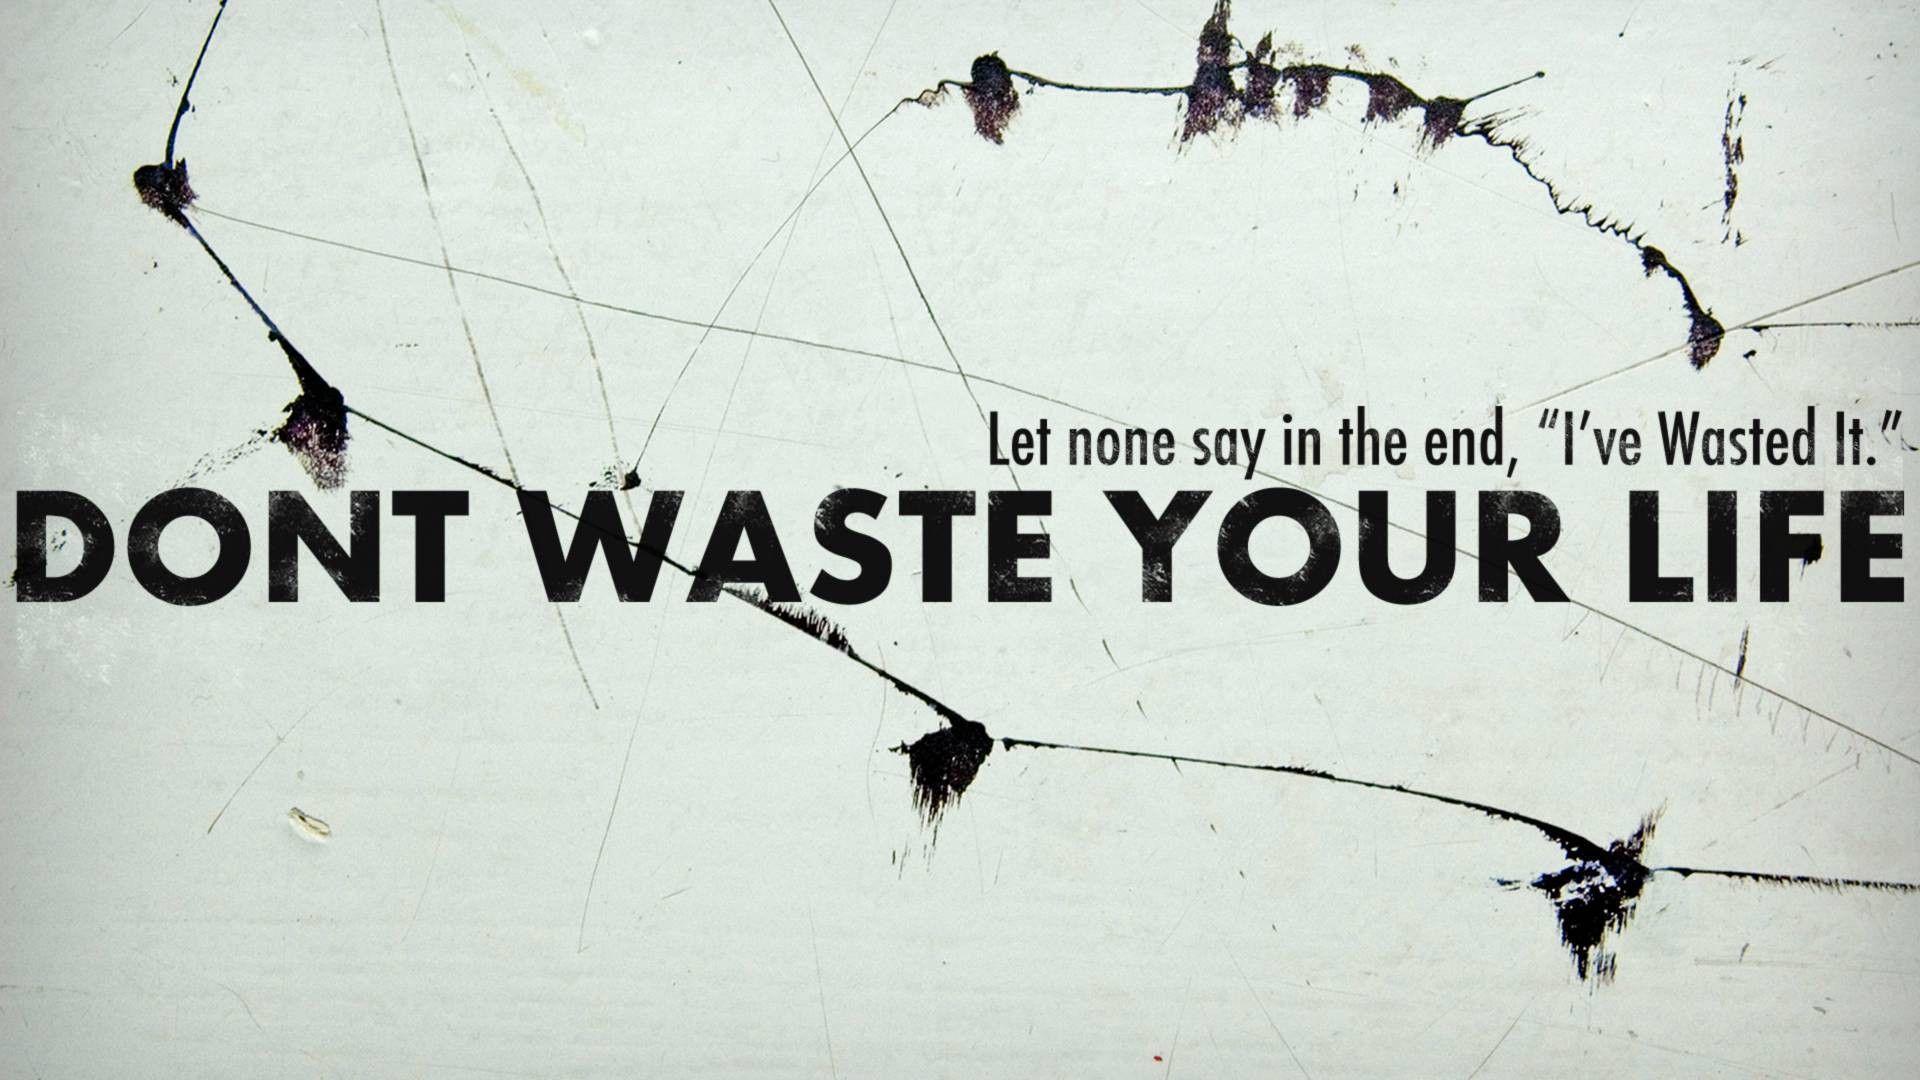 Quotes Of Dont Waste Your Life full 720p HD wallpaper whatsapp